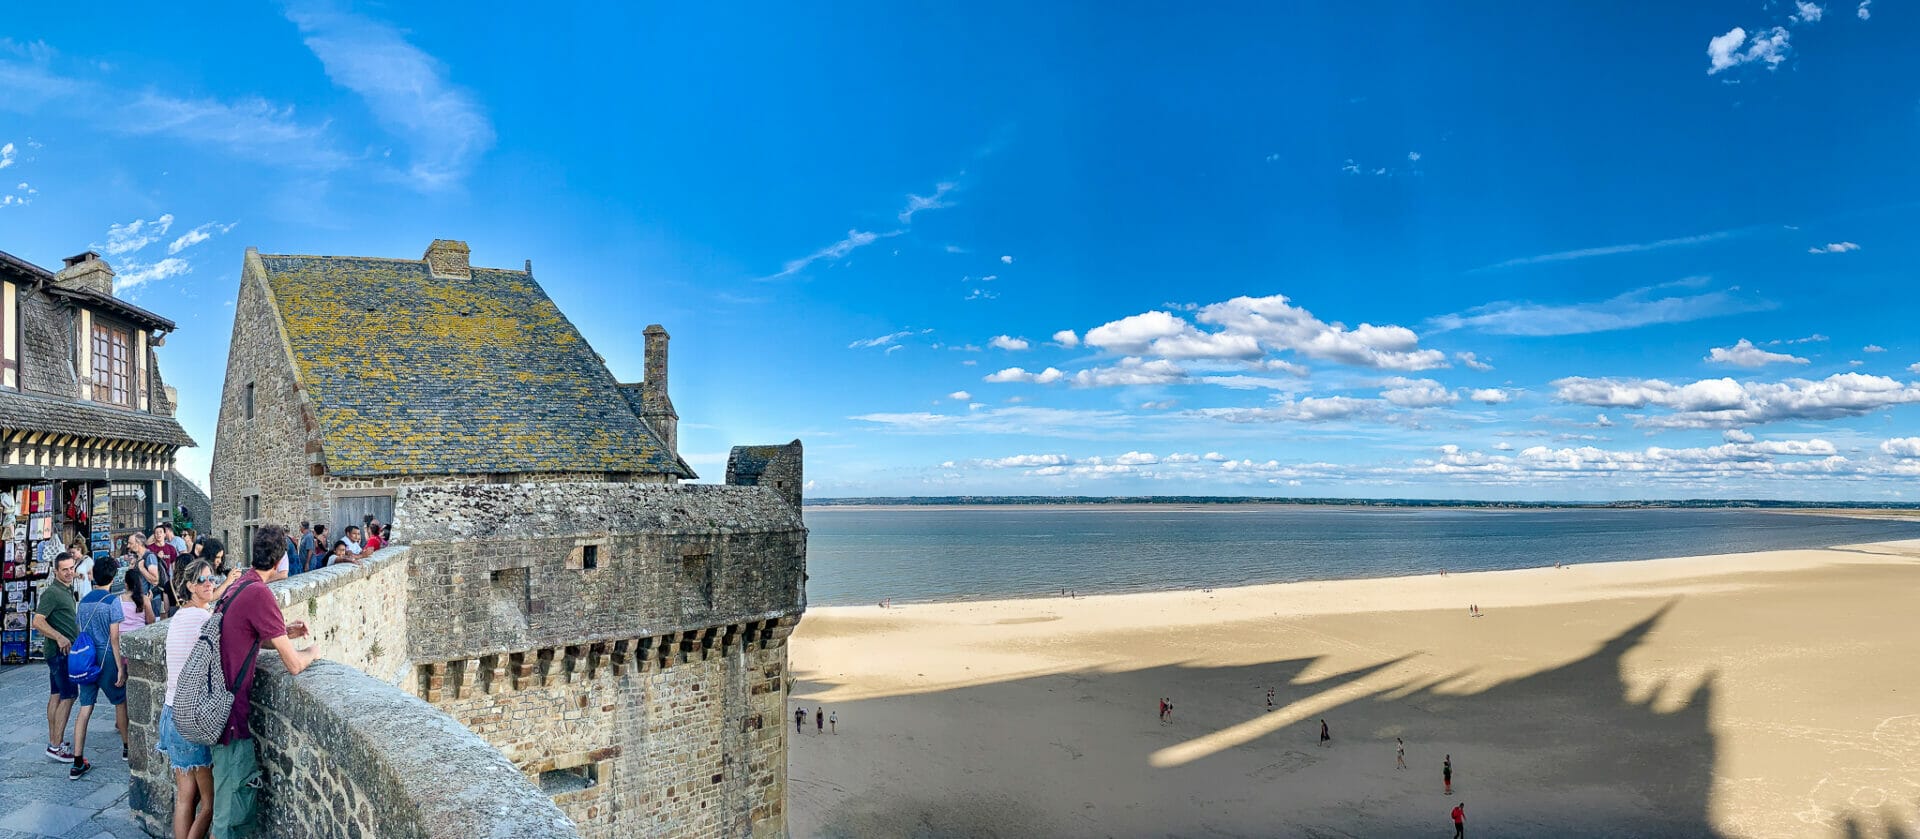 The ramparts of Mont Saint-Michel